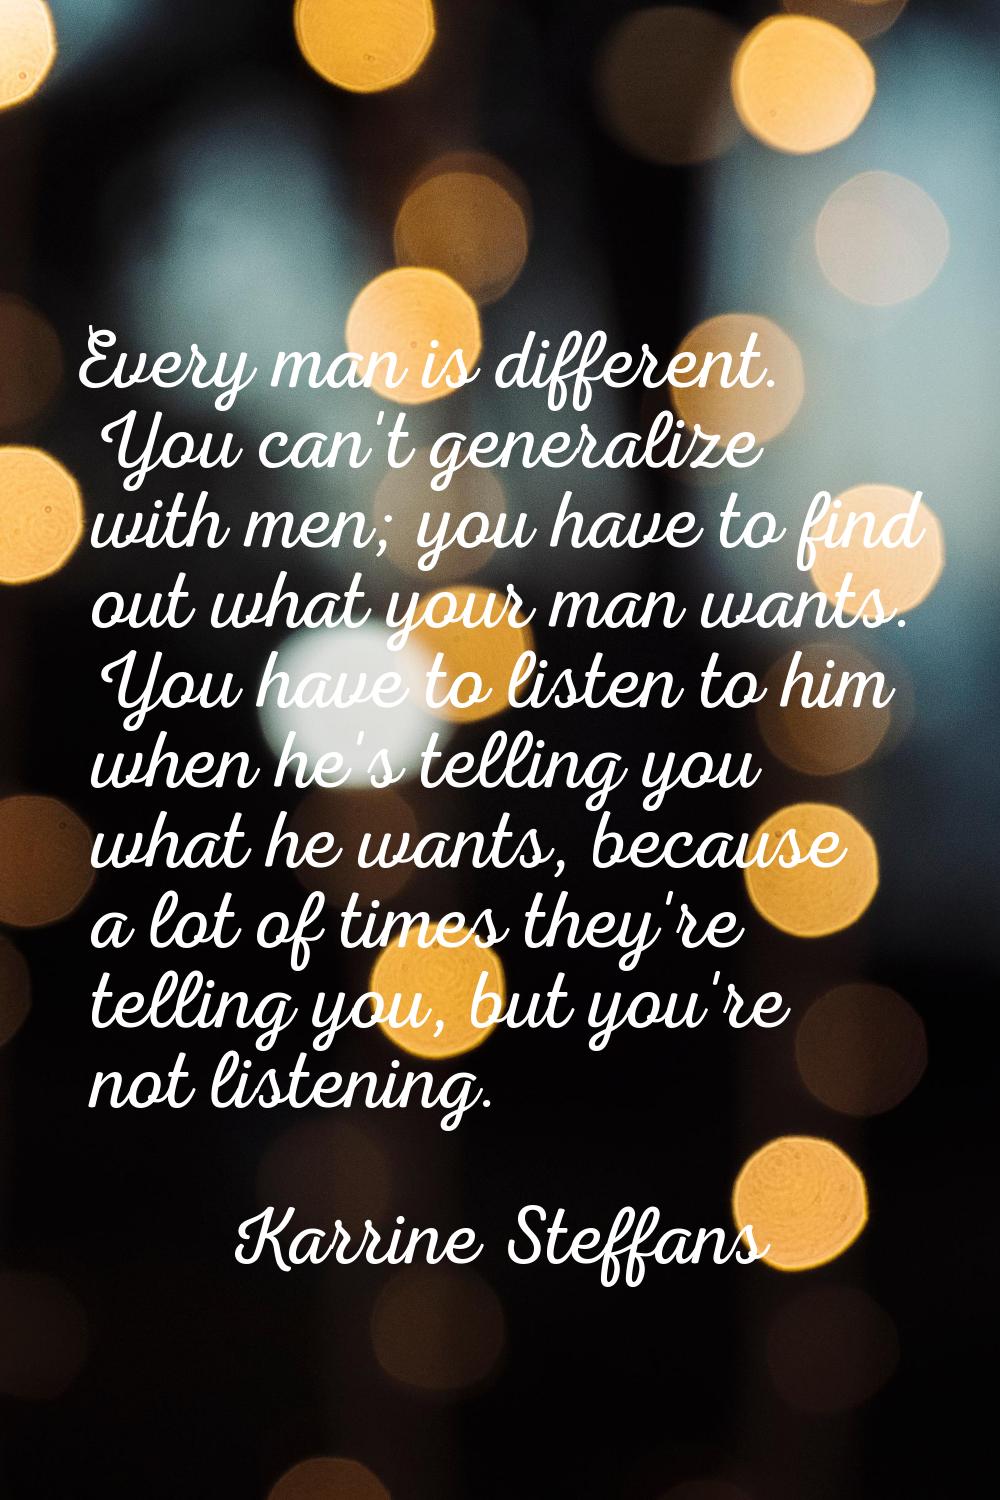 Every man is different. You can't generalize with men; you have to find out what your man wants. Yo